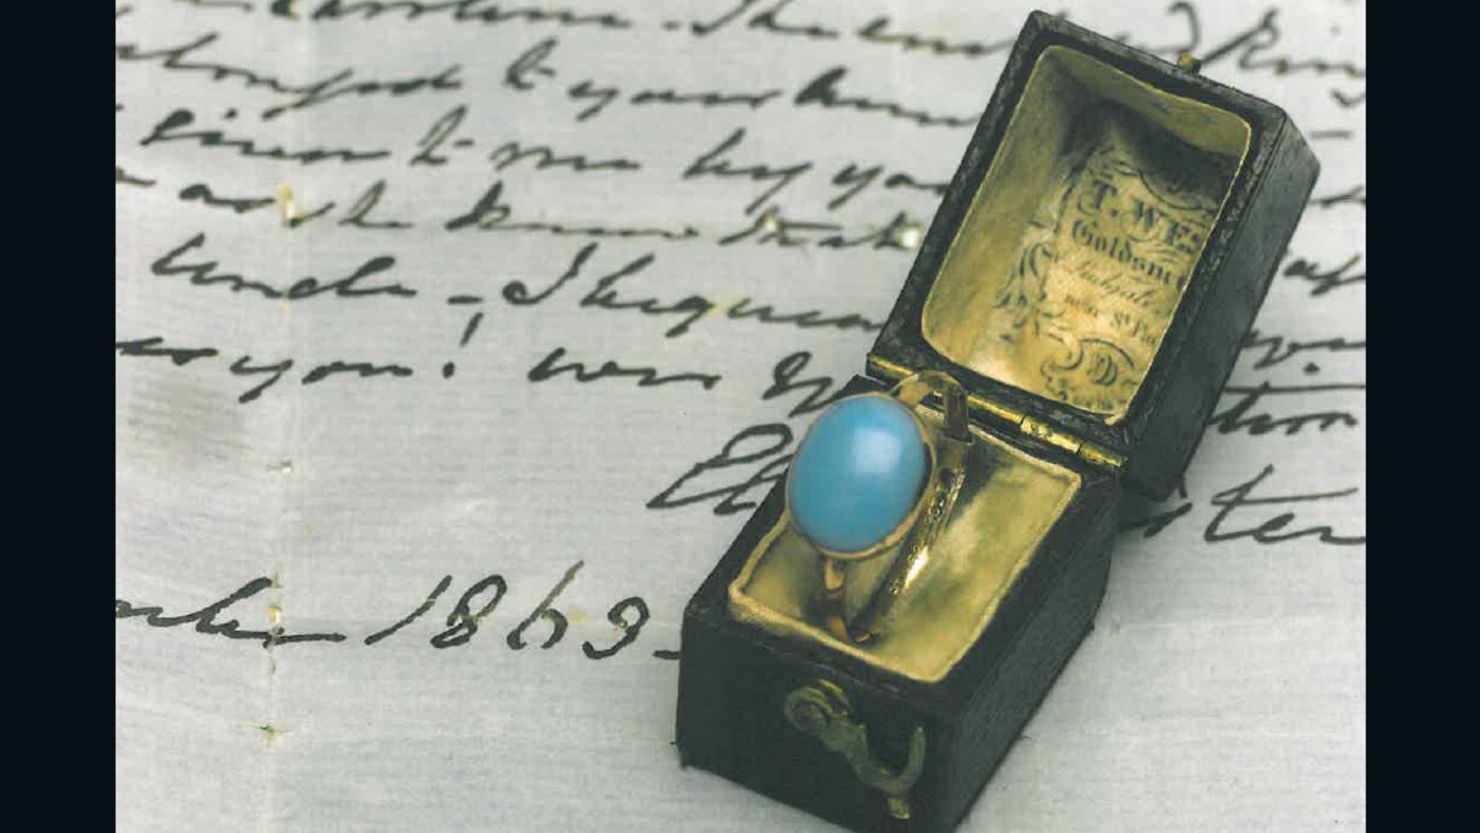 The ring that once belonged to English novelist Jane Austen was sold in a contemporary box with notes on its provenance.